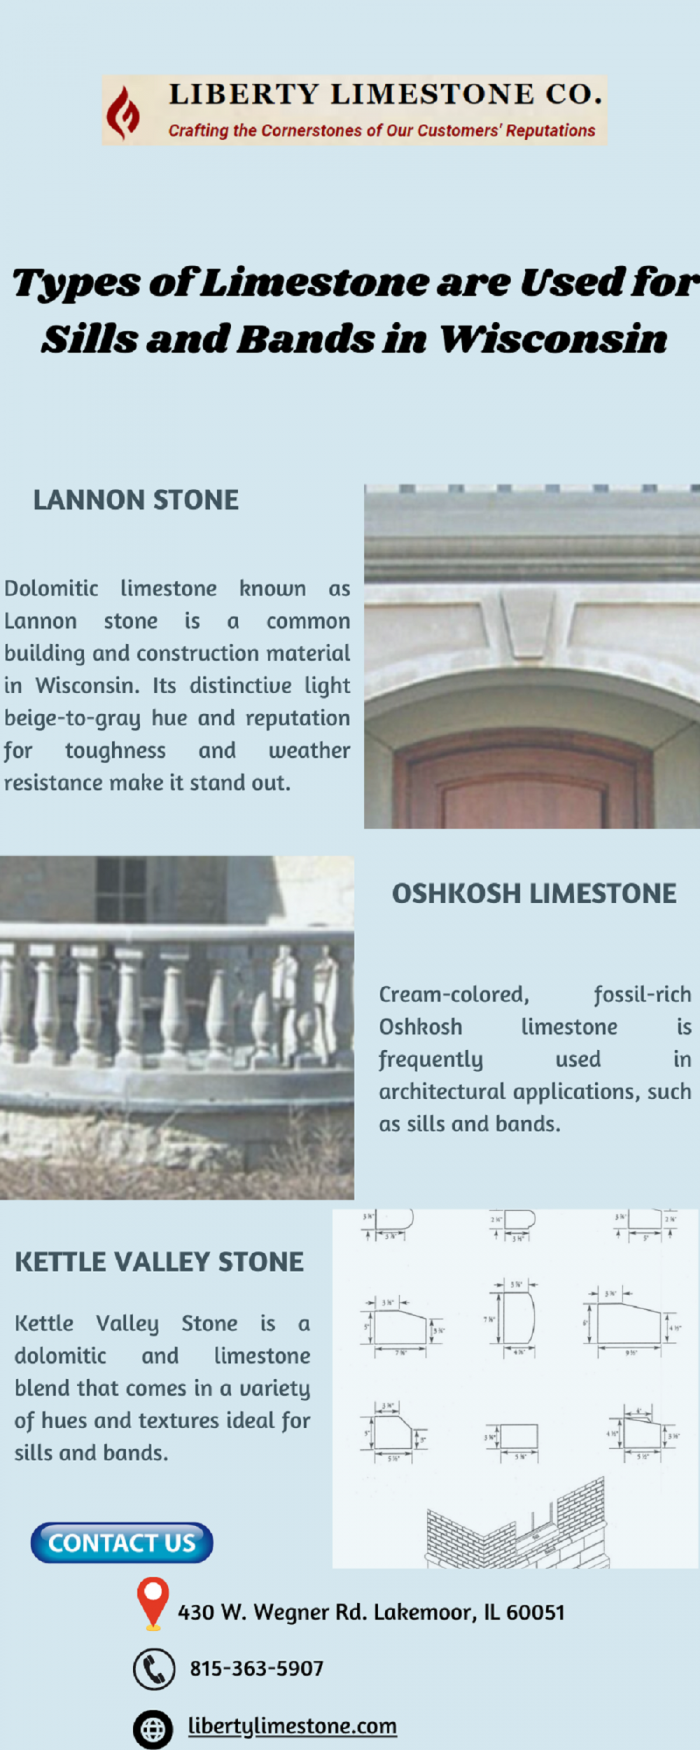 Types of Limestone are Used for Sills and Bands in Wisconsin